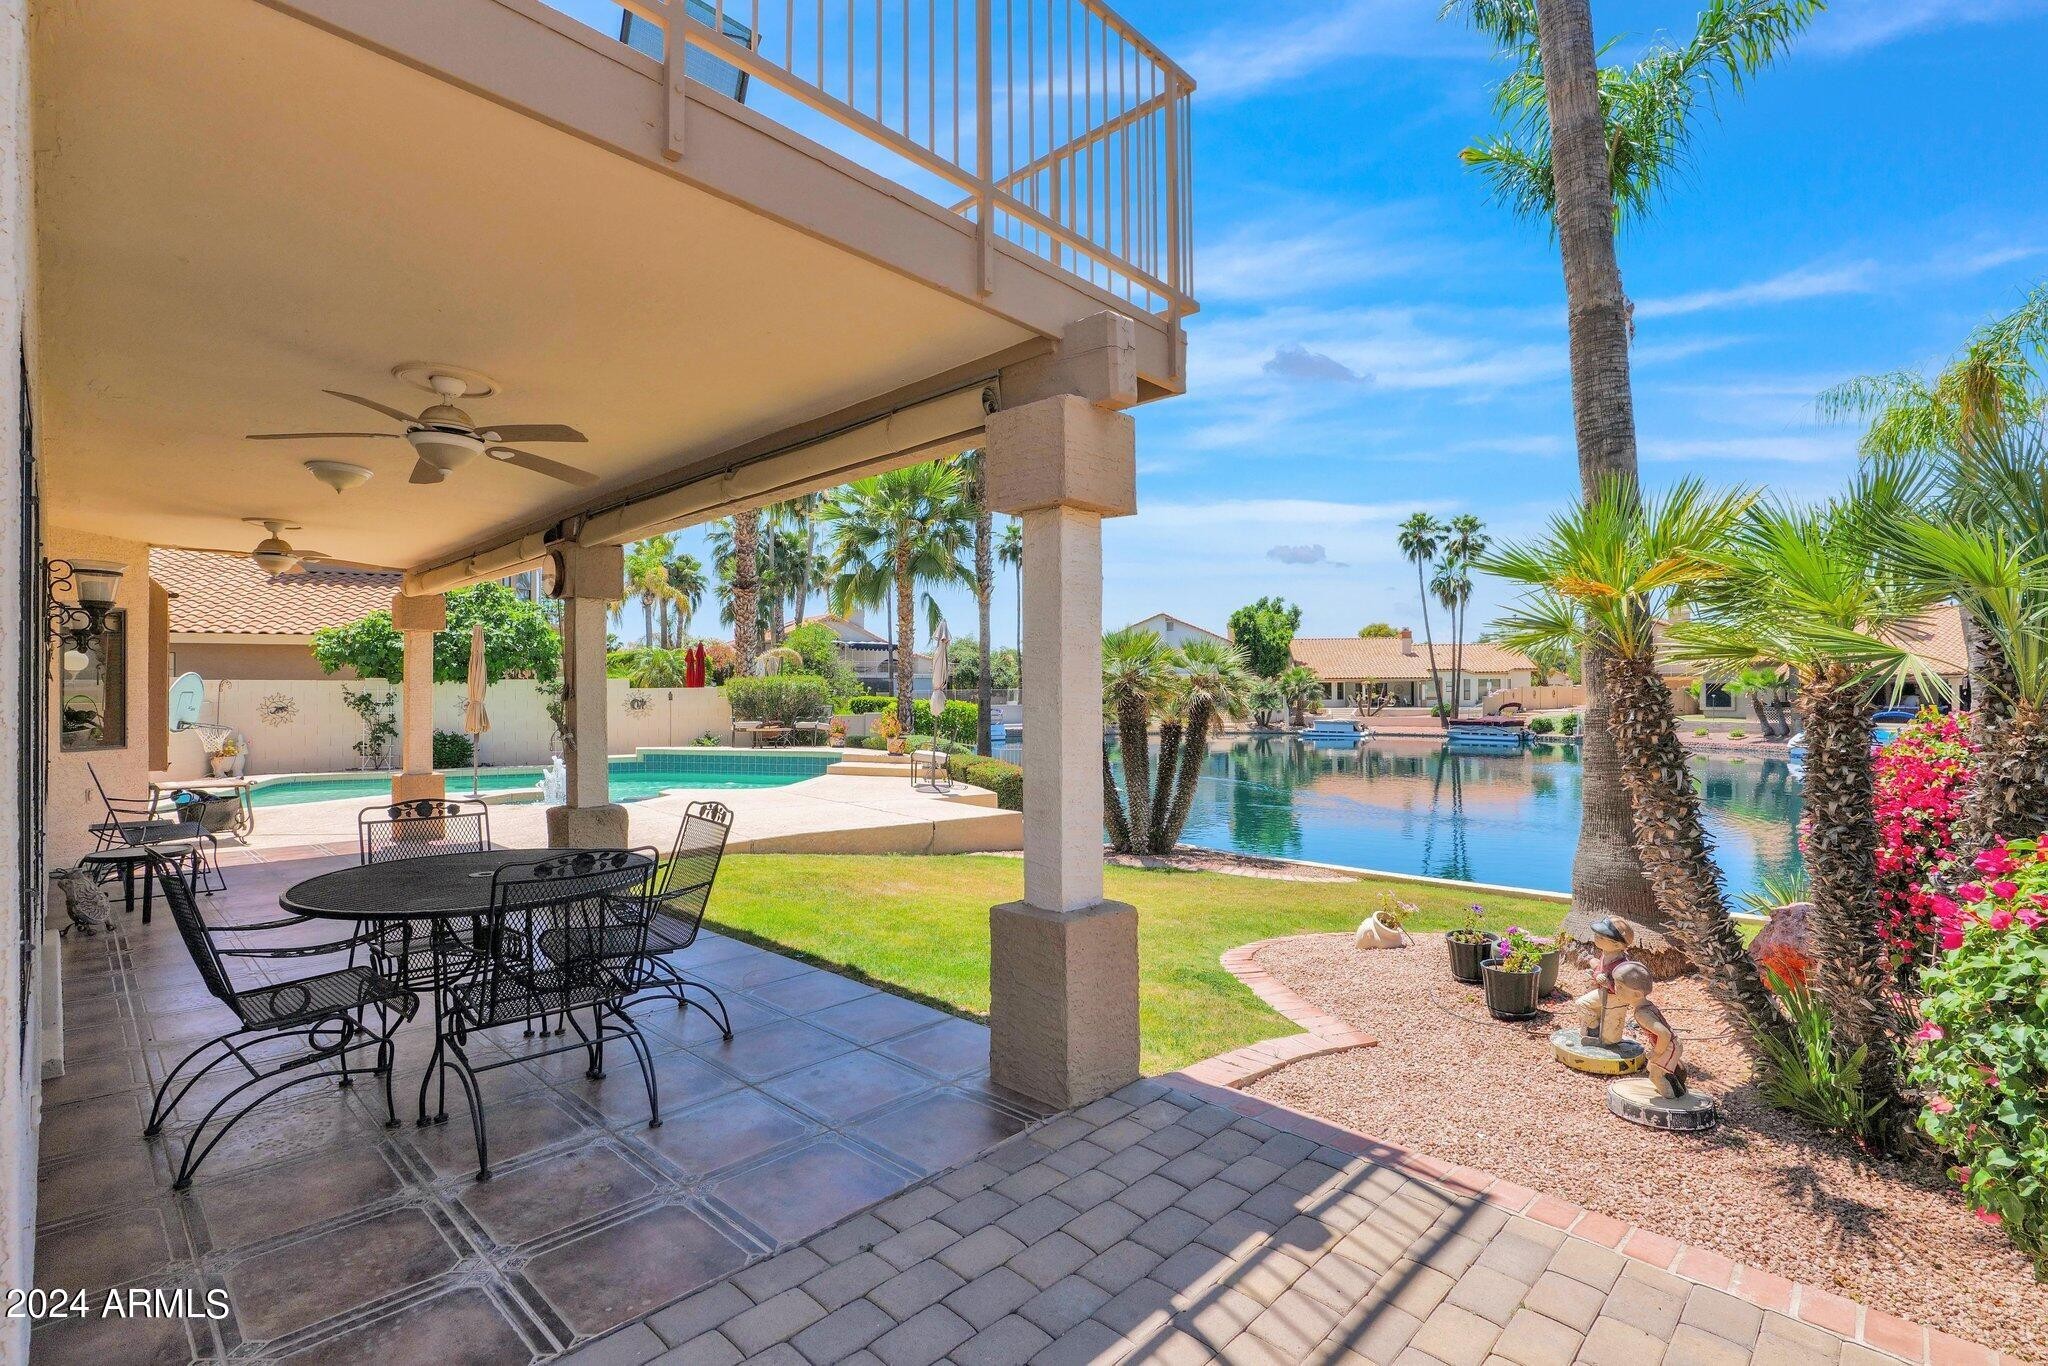 42. 1012 S Coral Key Court